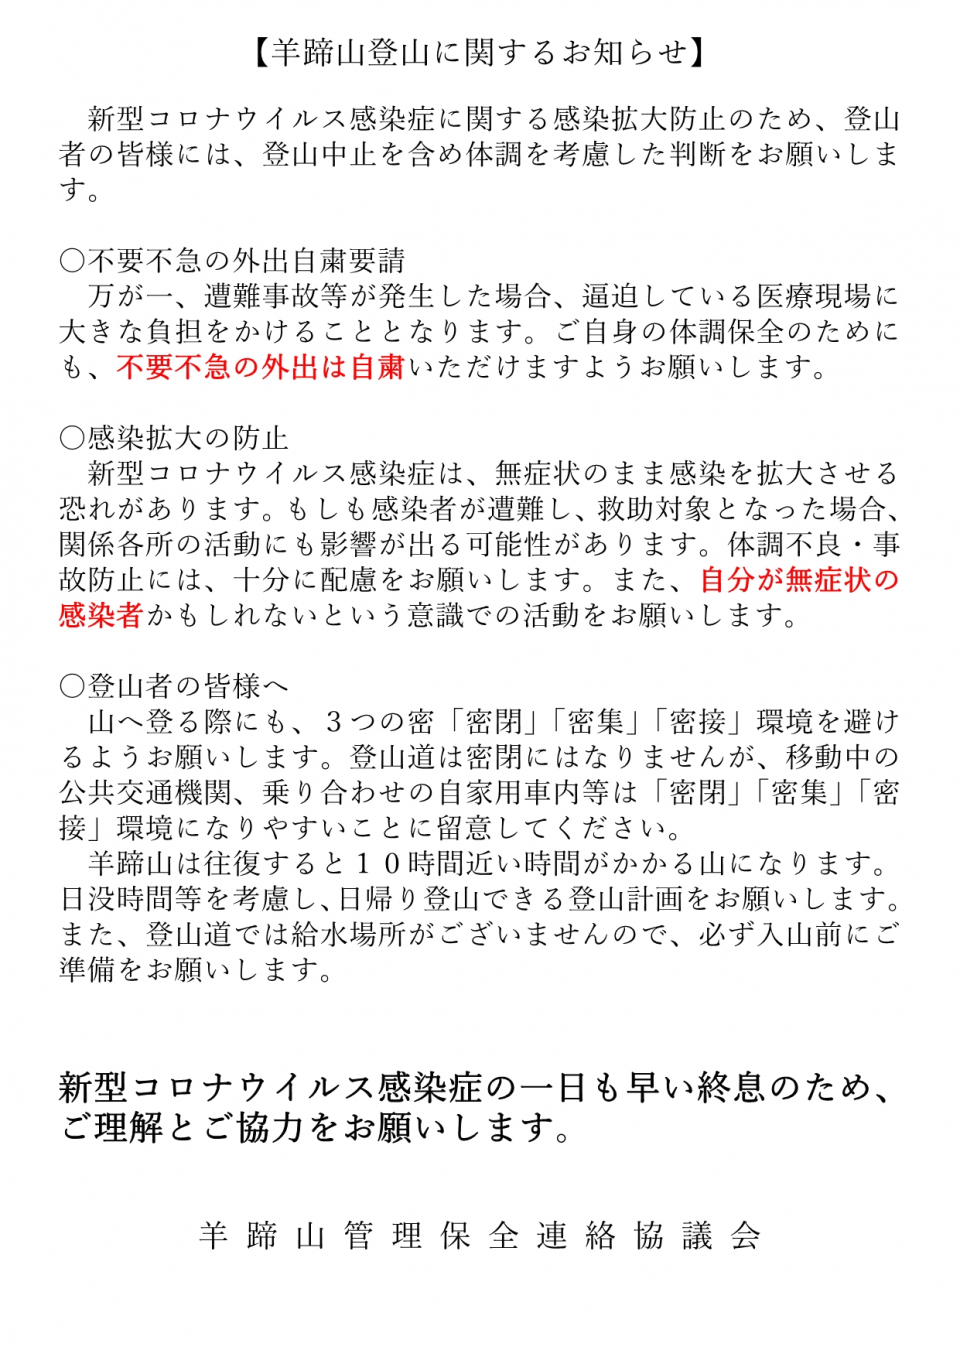 Notice about Mt. Yotei